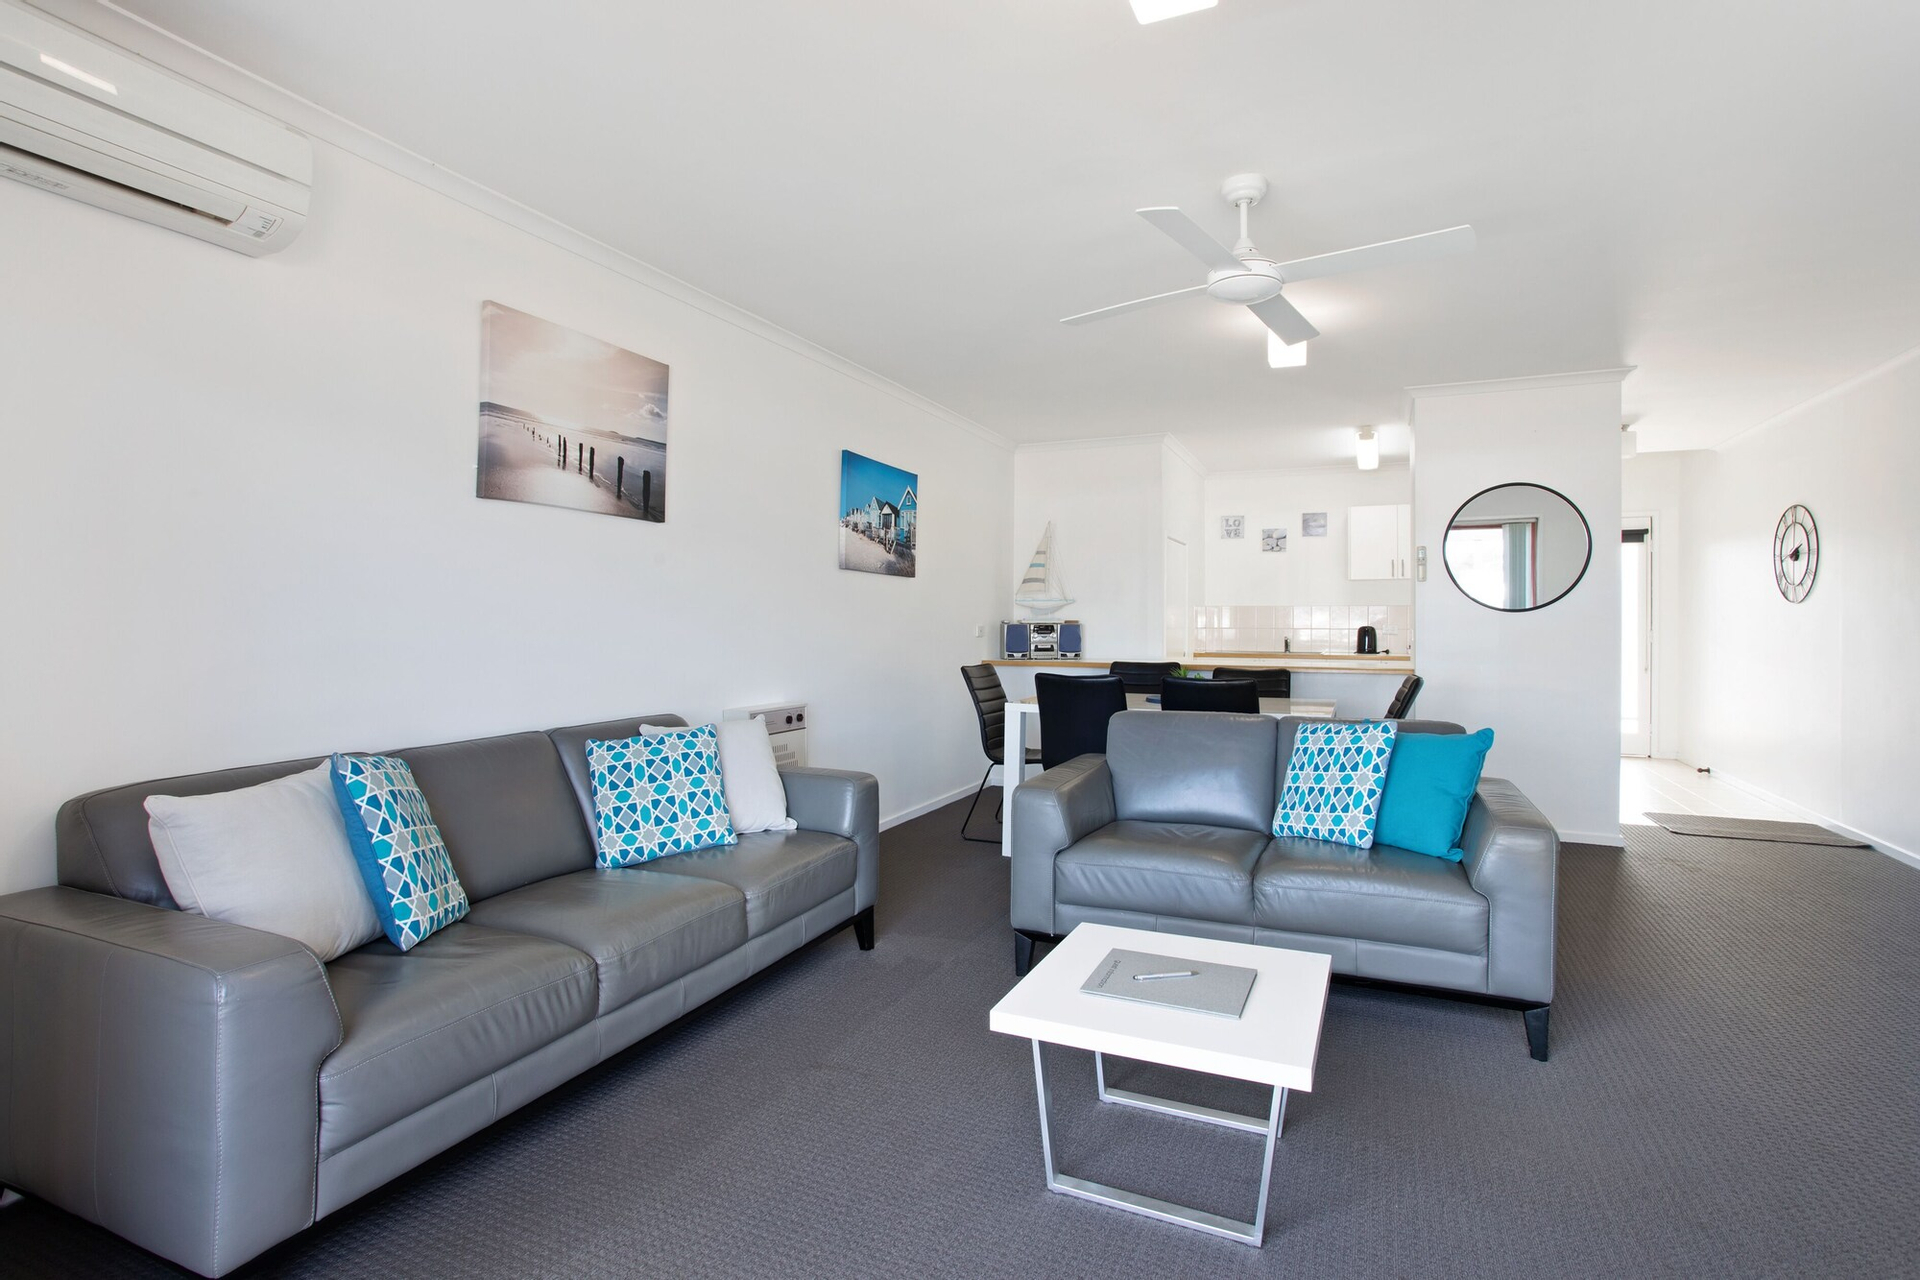 Others 5, Mariners Cove at Paynesville Motel & Apartments, E. Gippsland - Bairnsdale